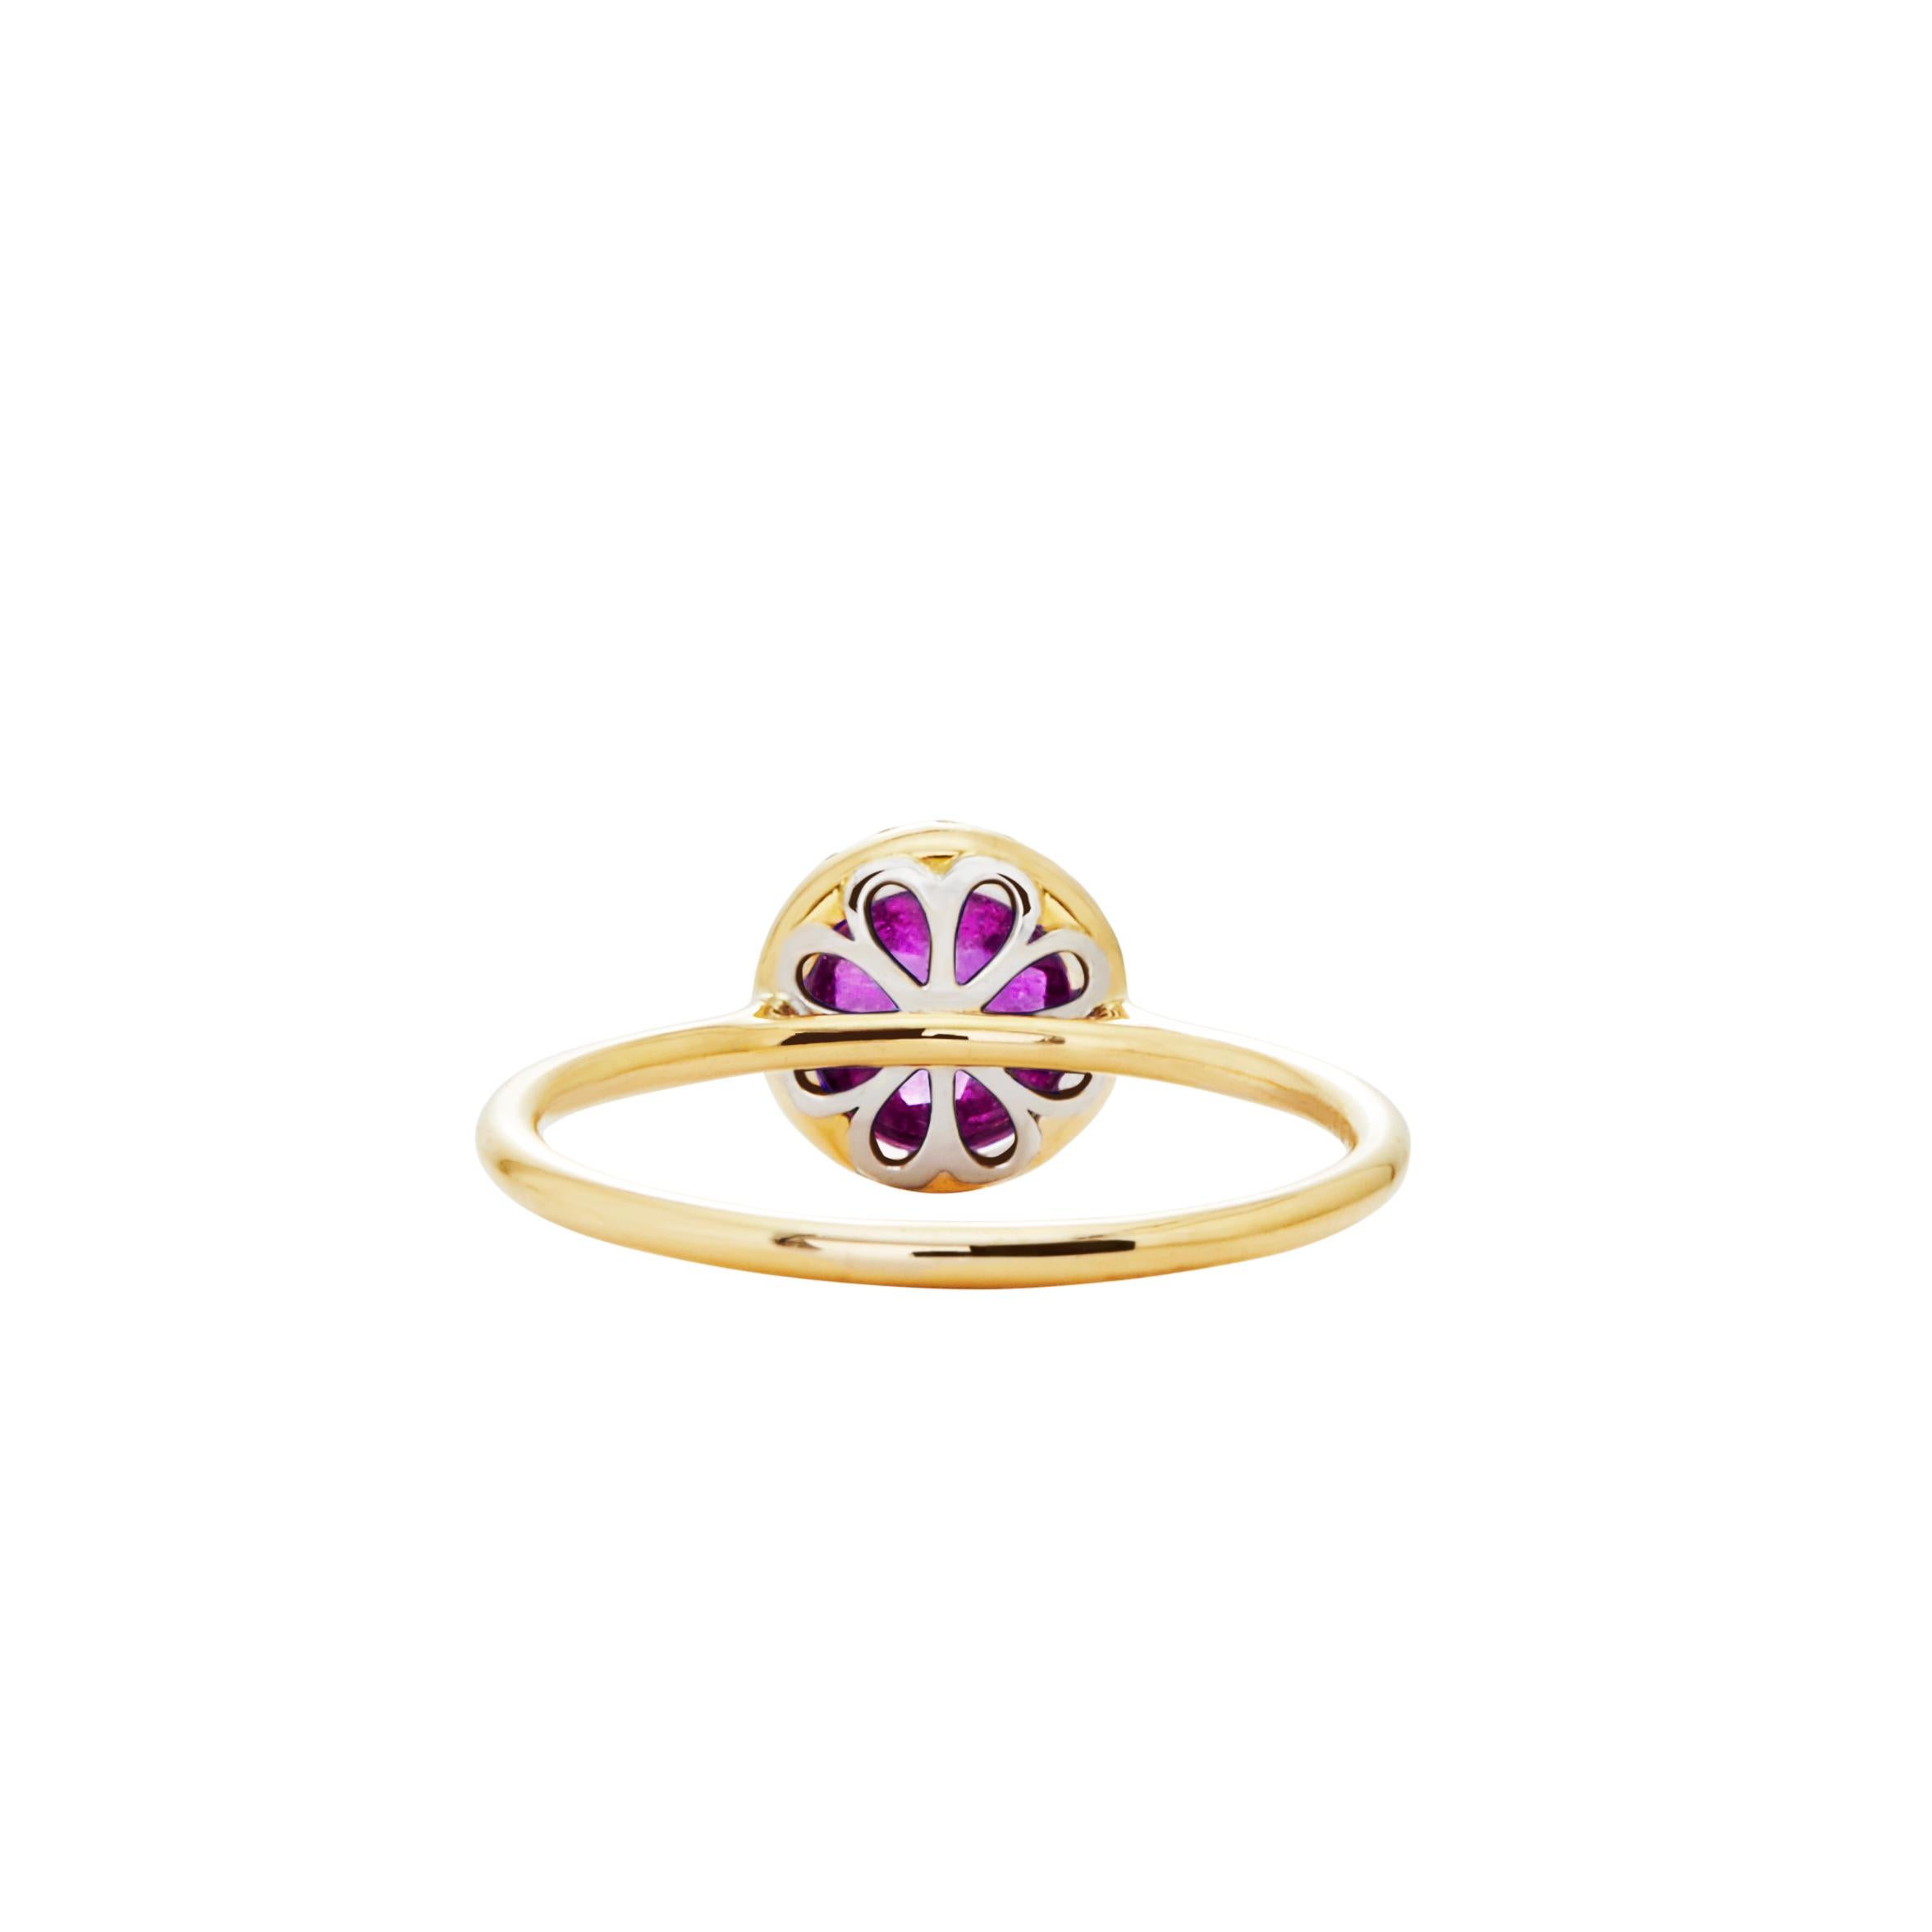 Marcel Salloum 2.16 Carat Purple Amethyst Halo Ring in 18 Yellow Gold For Sale 1